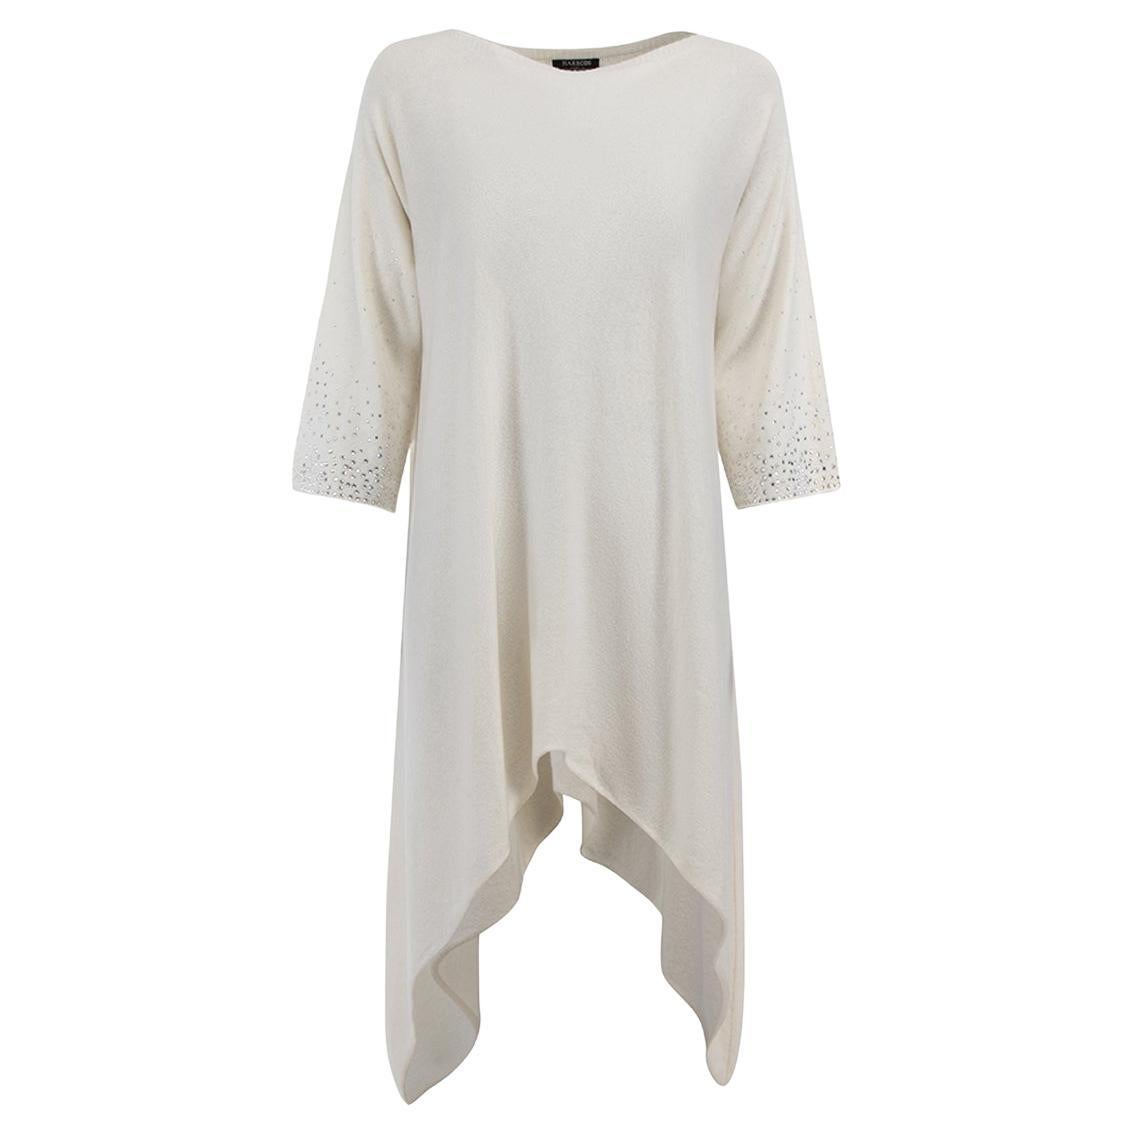 Harrods Women's Cream Knit Jumper with Embellished Sleeves